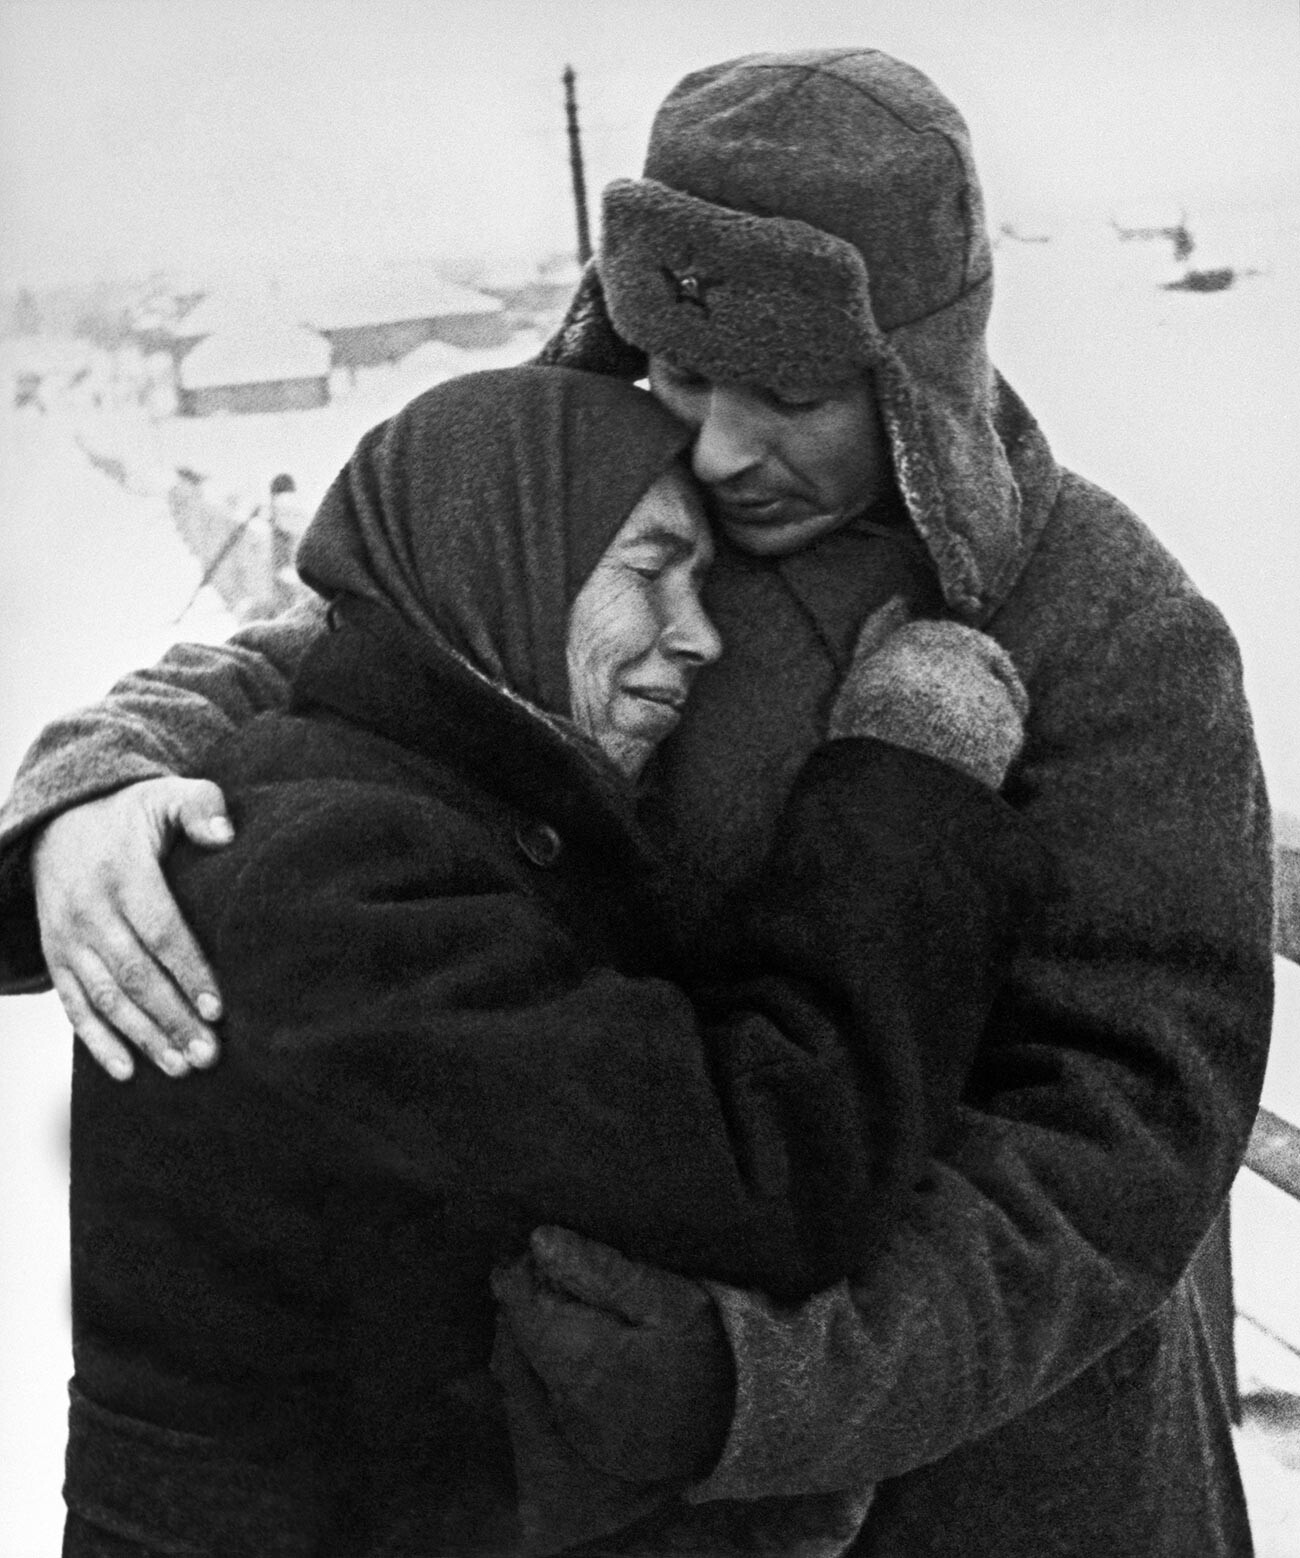 A woman embracing a Soviet soldier in a liberated village.